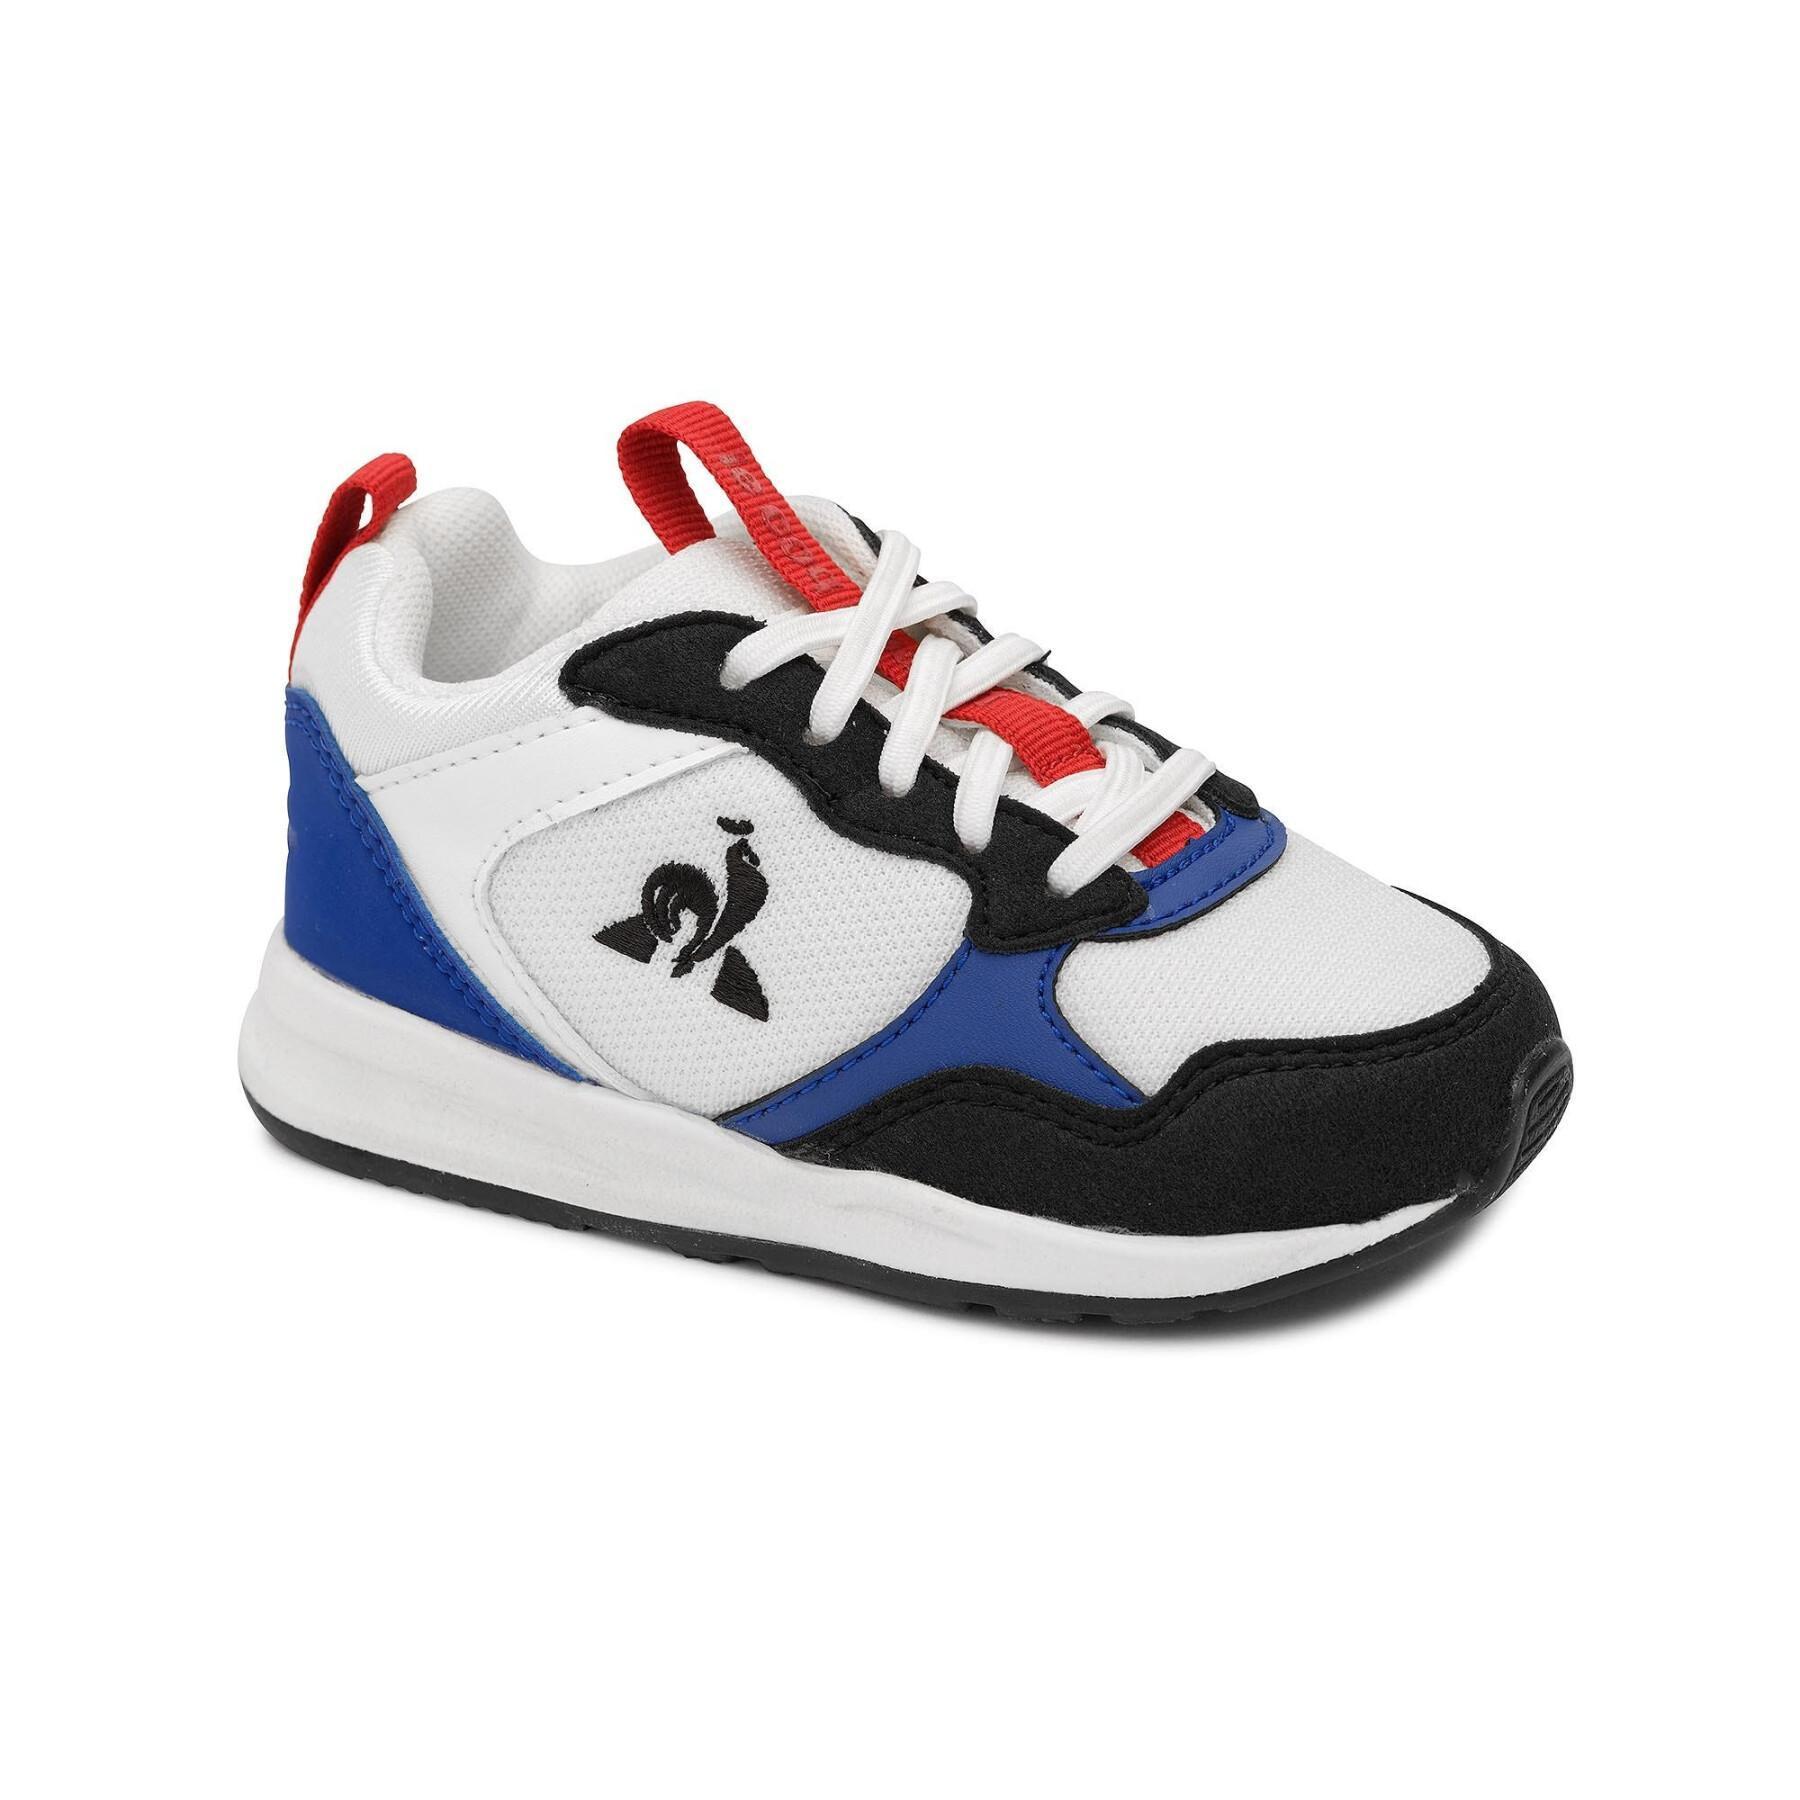 Sneakers Kind Le Coq Sportif R500 inf